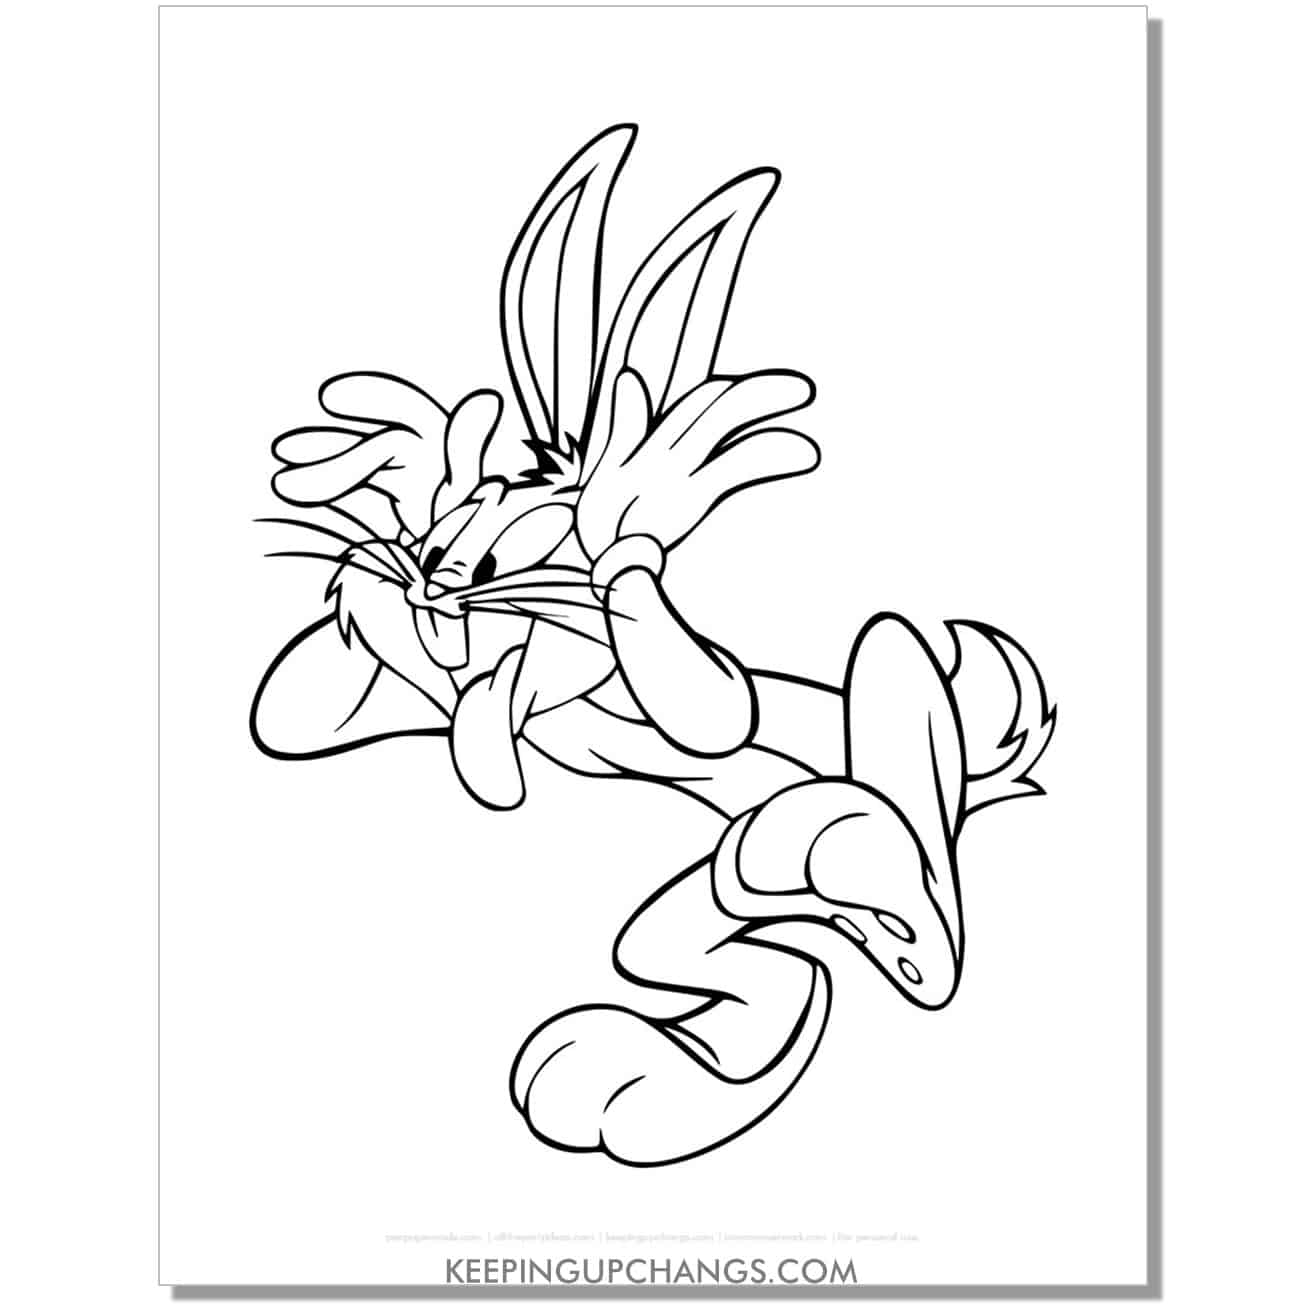 free bugs bunny making teasing face looney tunes coloring page, sheet